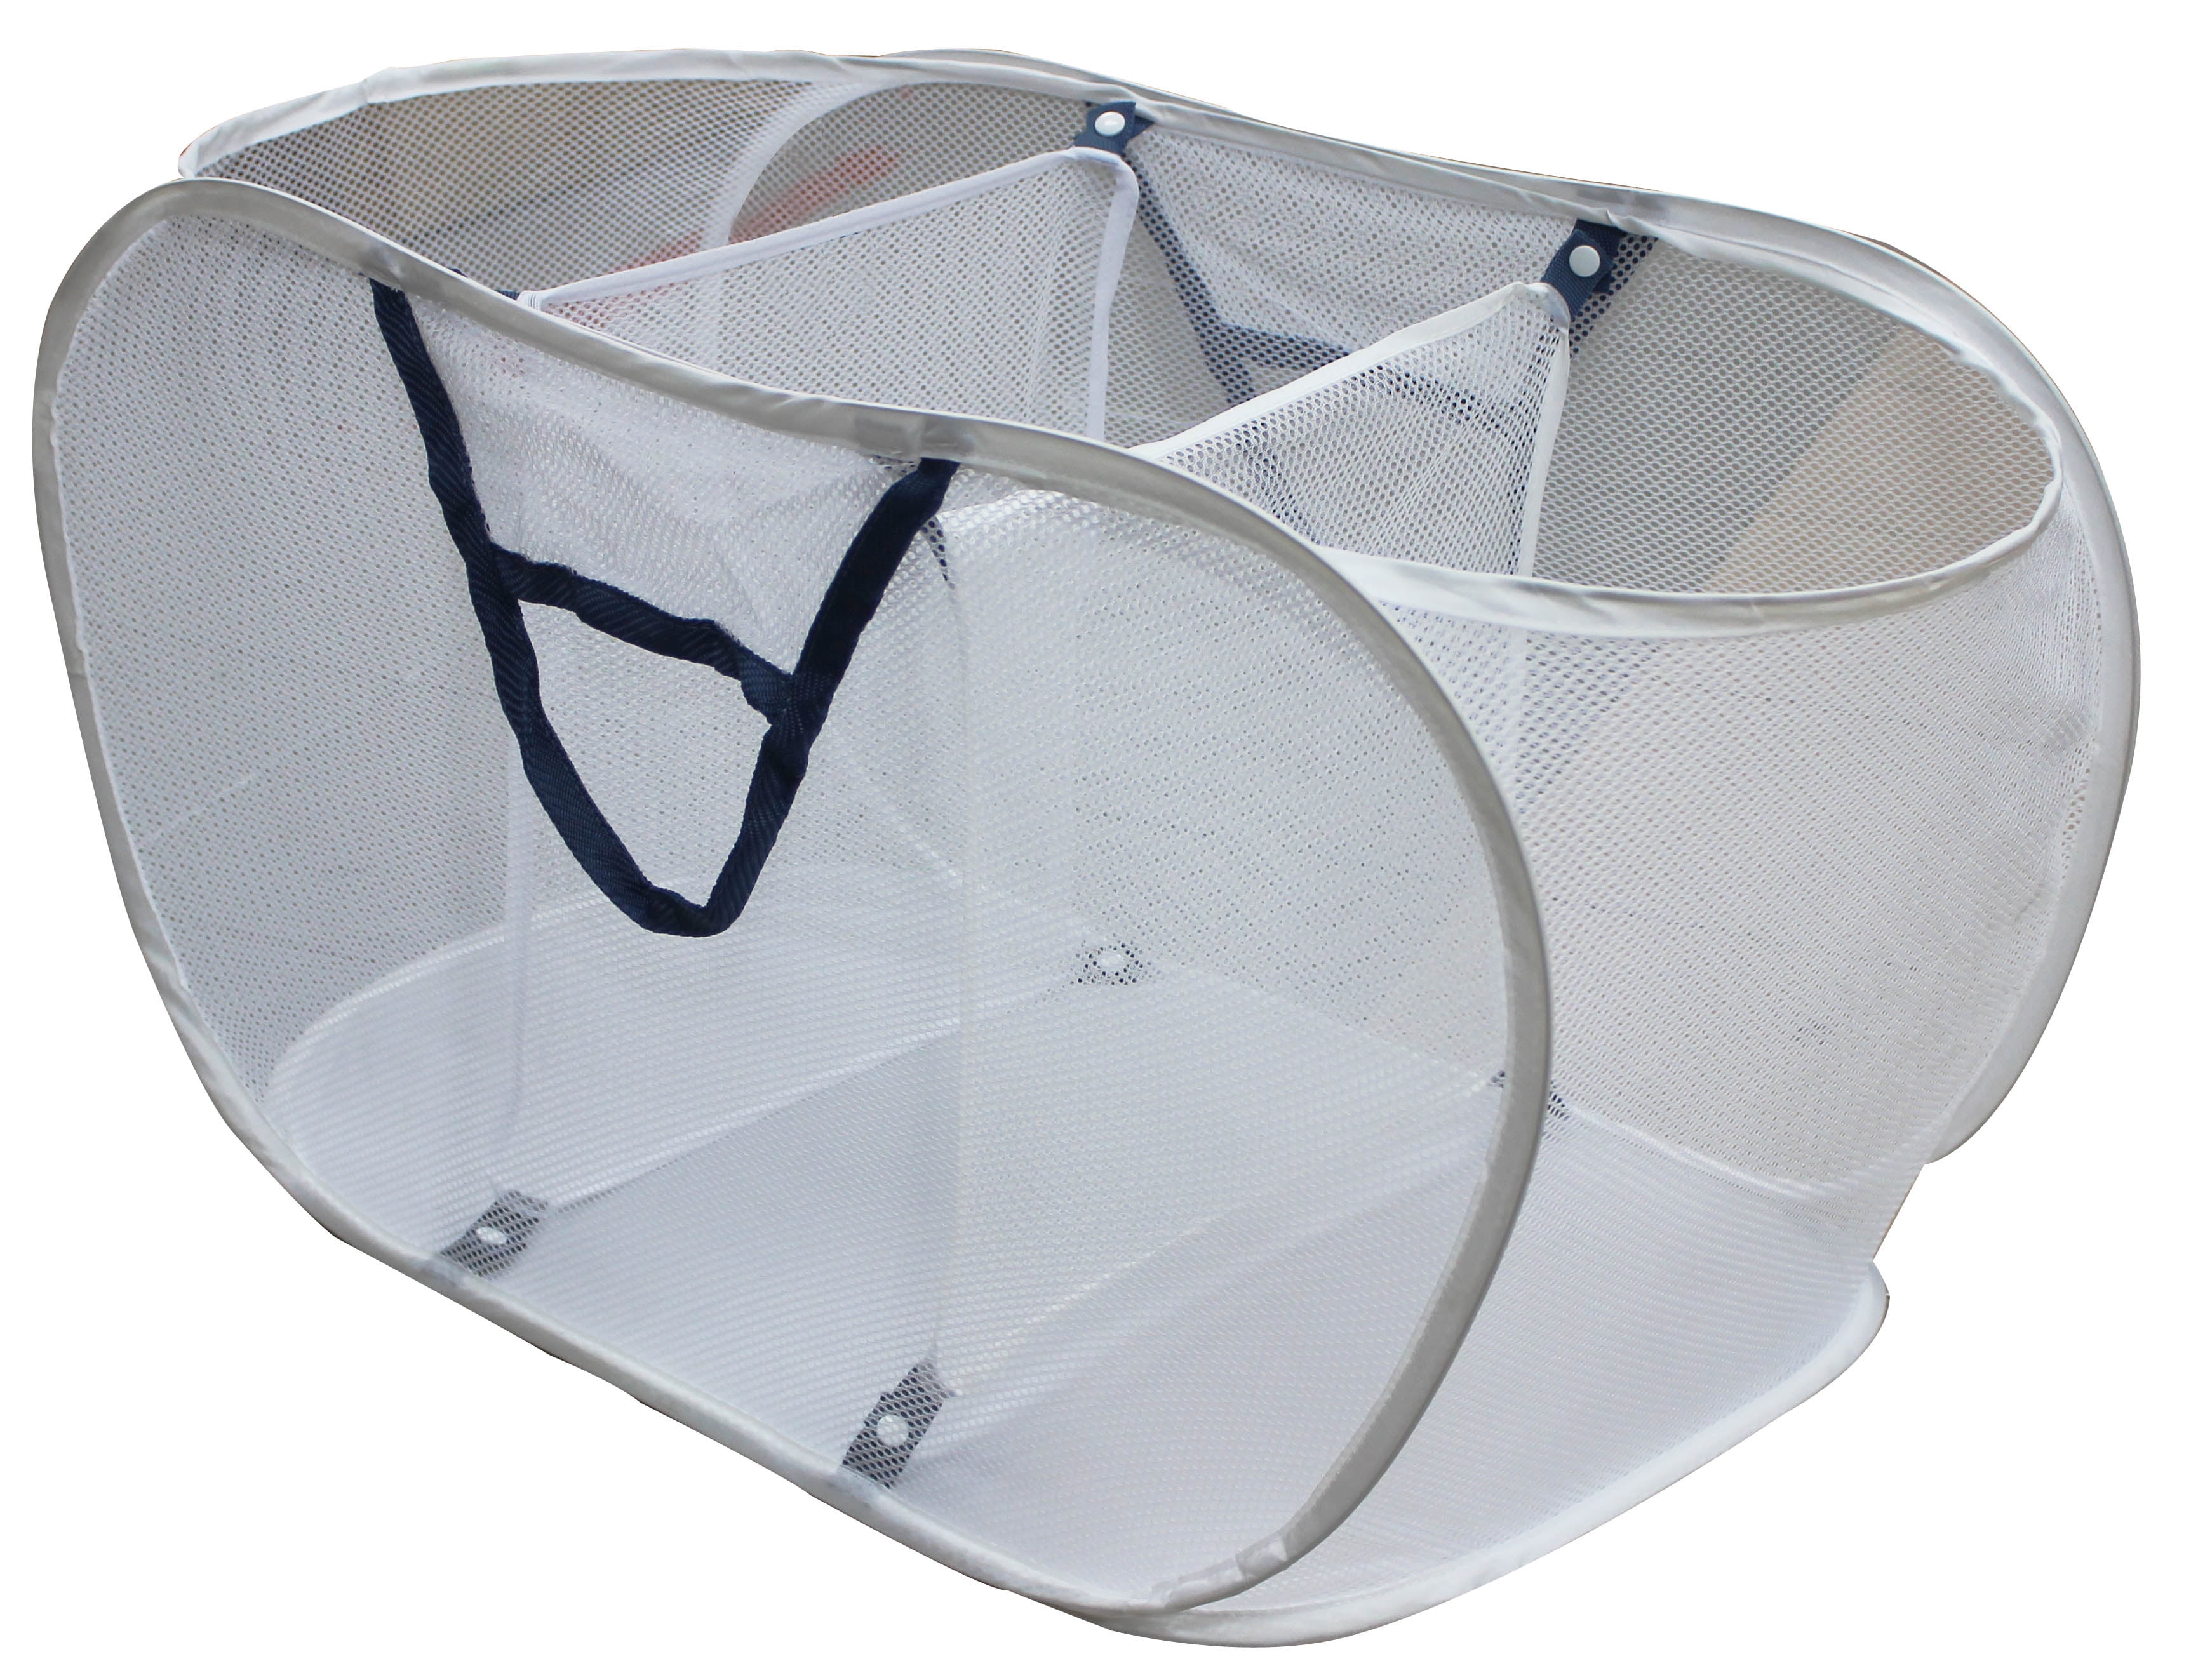 Details about   NEW Mesh Collapsible Portable Laundry Basket White 